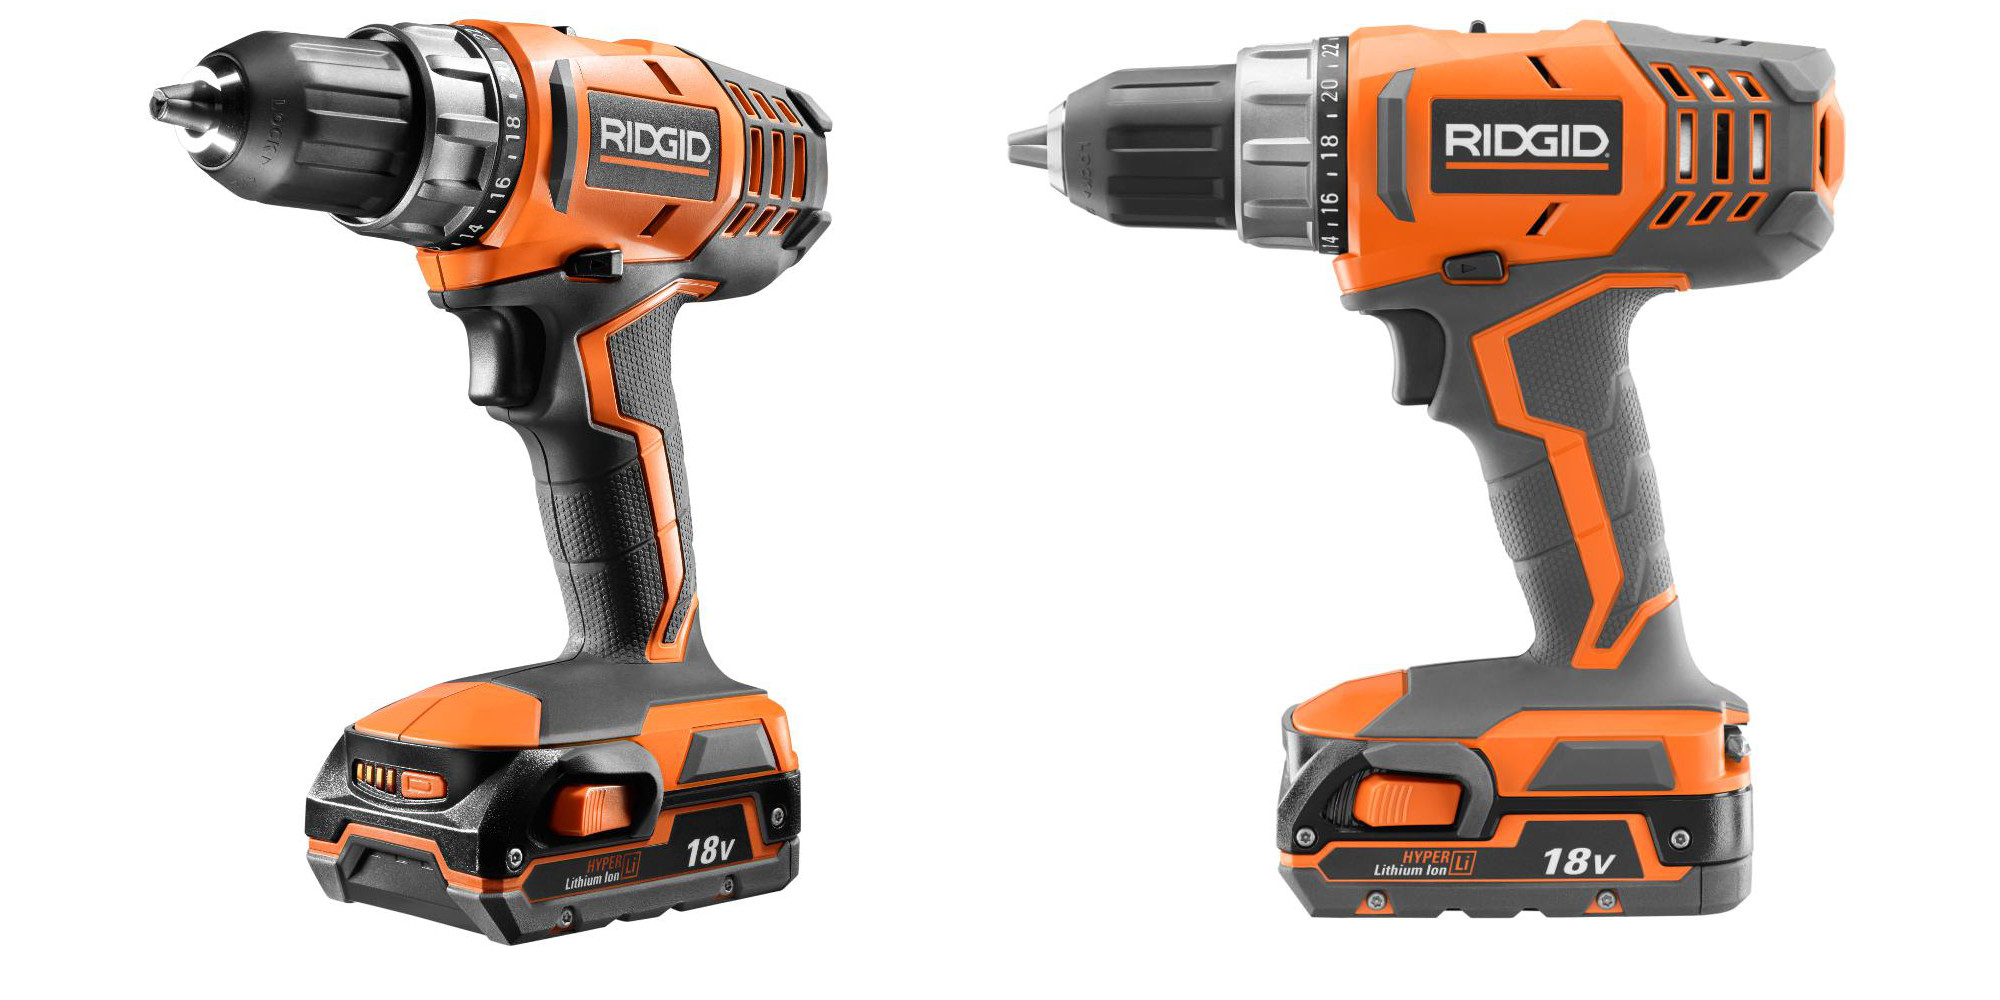 This Ridgid 18V Cordless DrillDriver Kit Comes With A Lifetime Parts